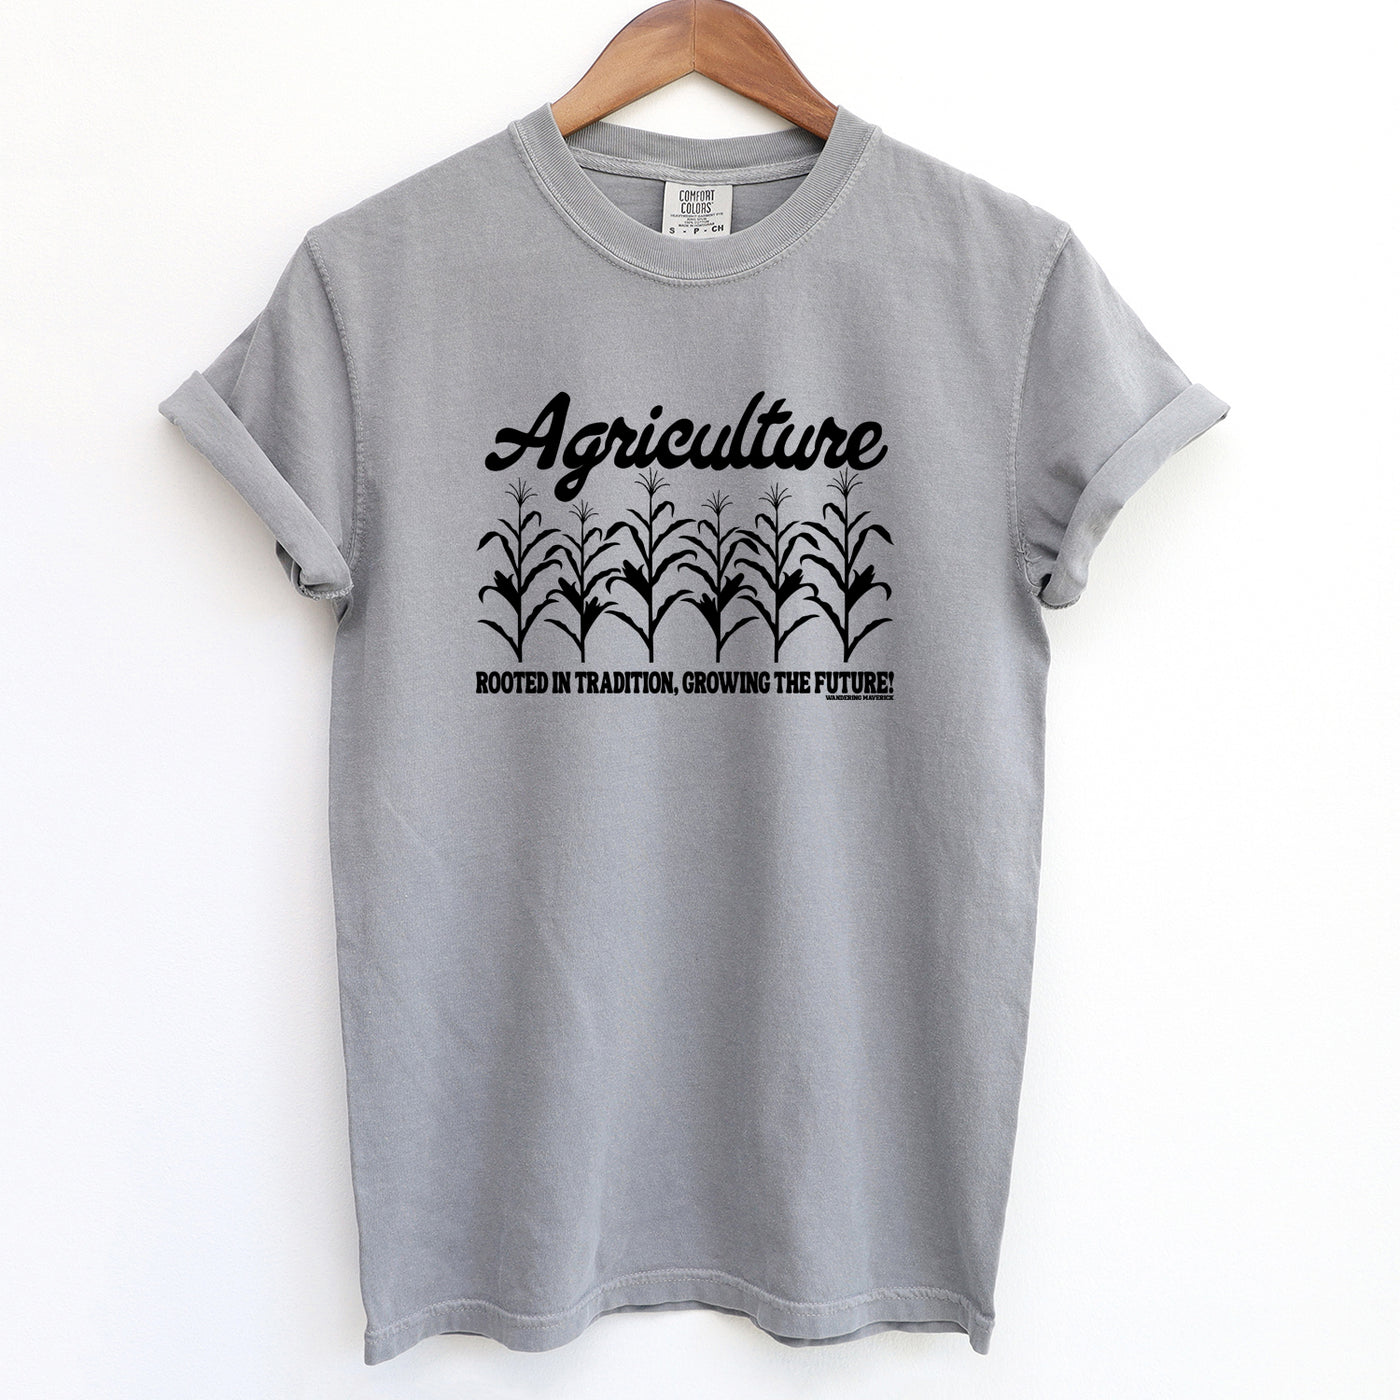 Agriculture: Rooted In Tradition, Growing The Future Crop T-Shirt (S-4XL) - Multiple Colors!